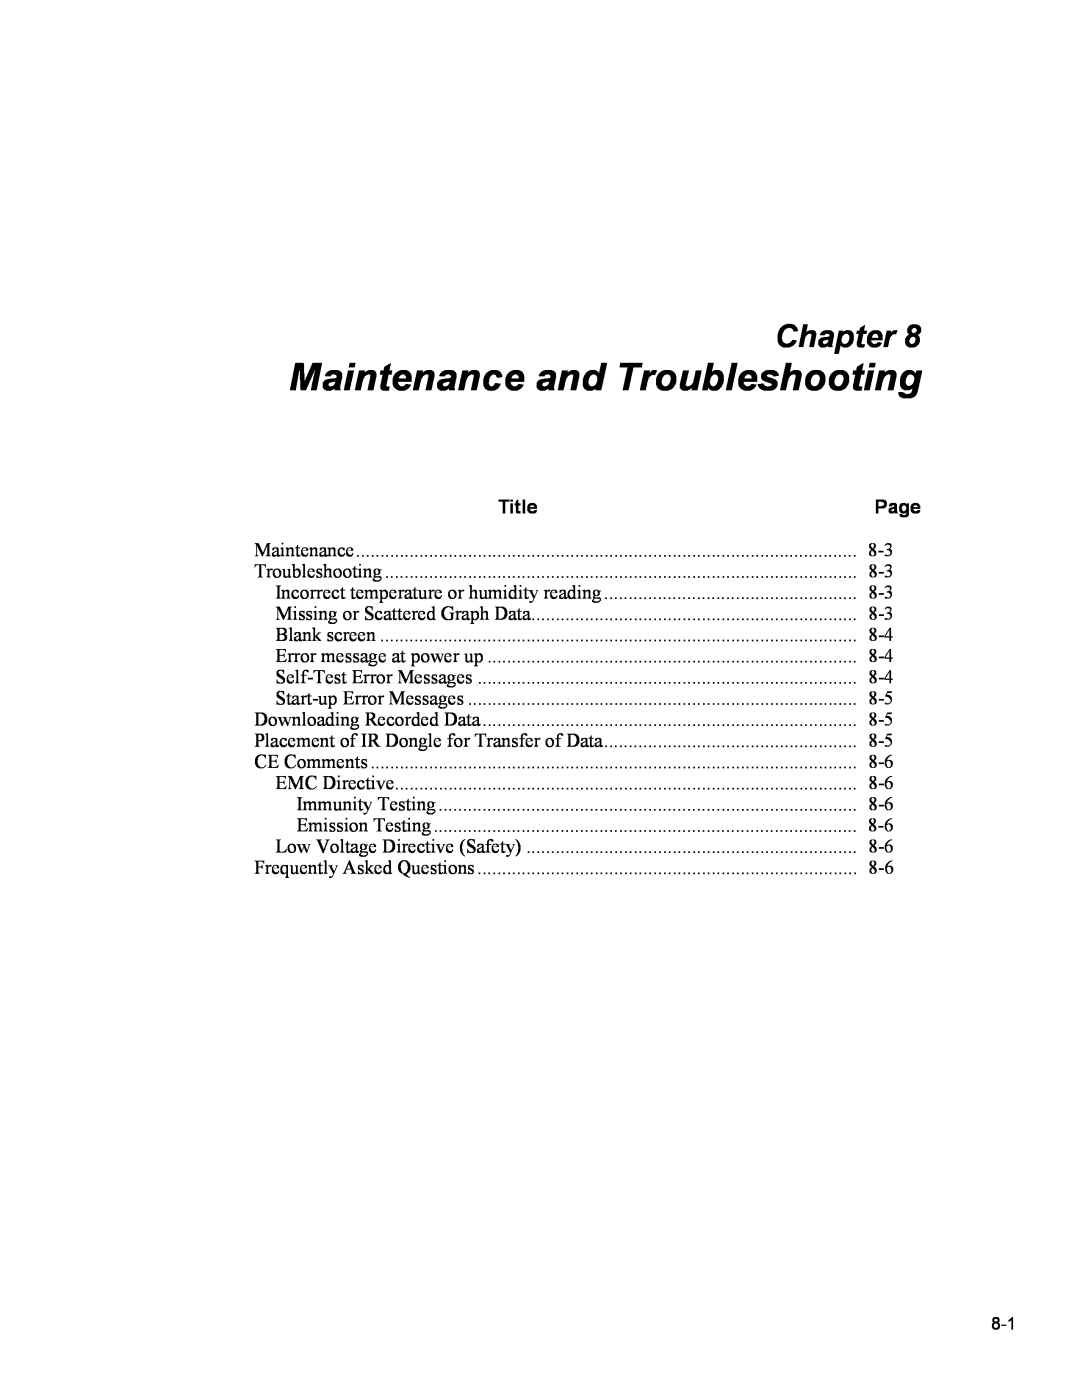 Fluke 5020A user manual Maintenance and Troubleshooting, Chapter, Title, Page, Missing or Scattered Graph Data 